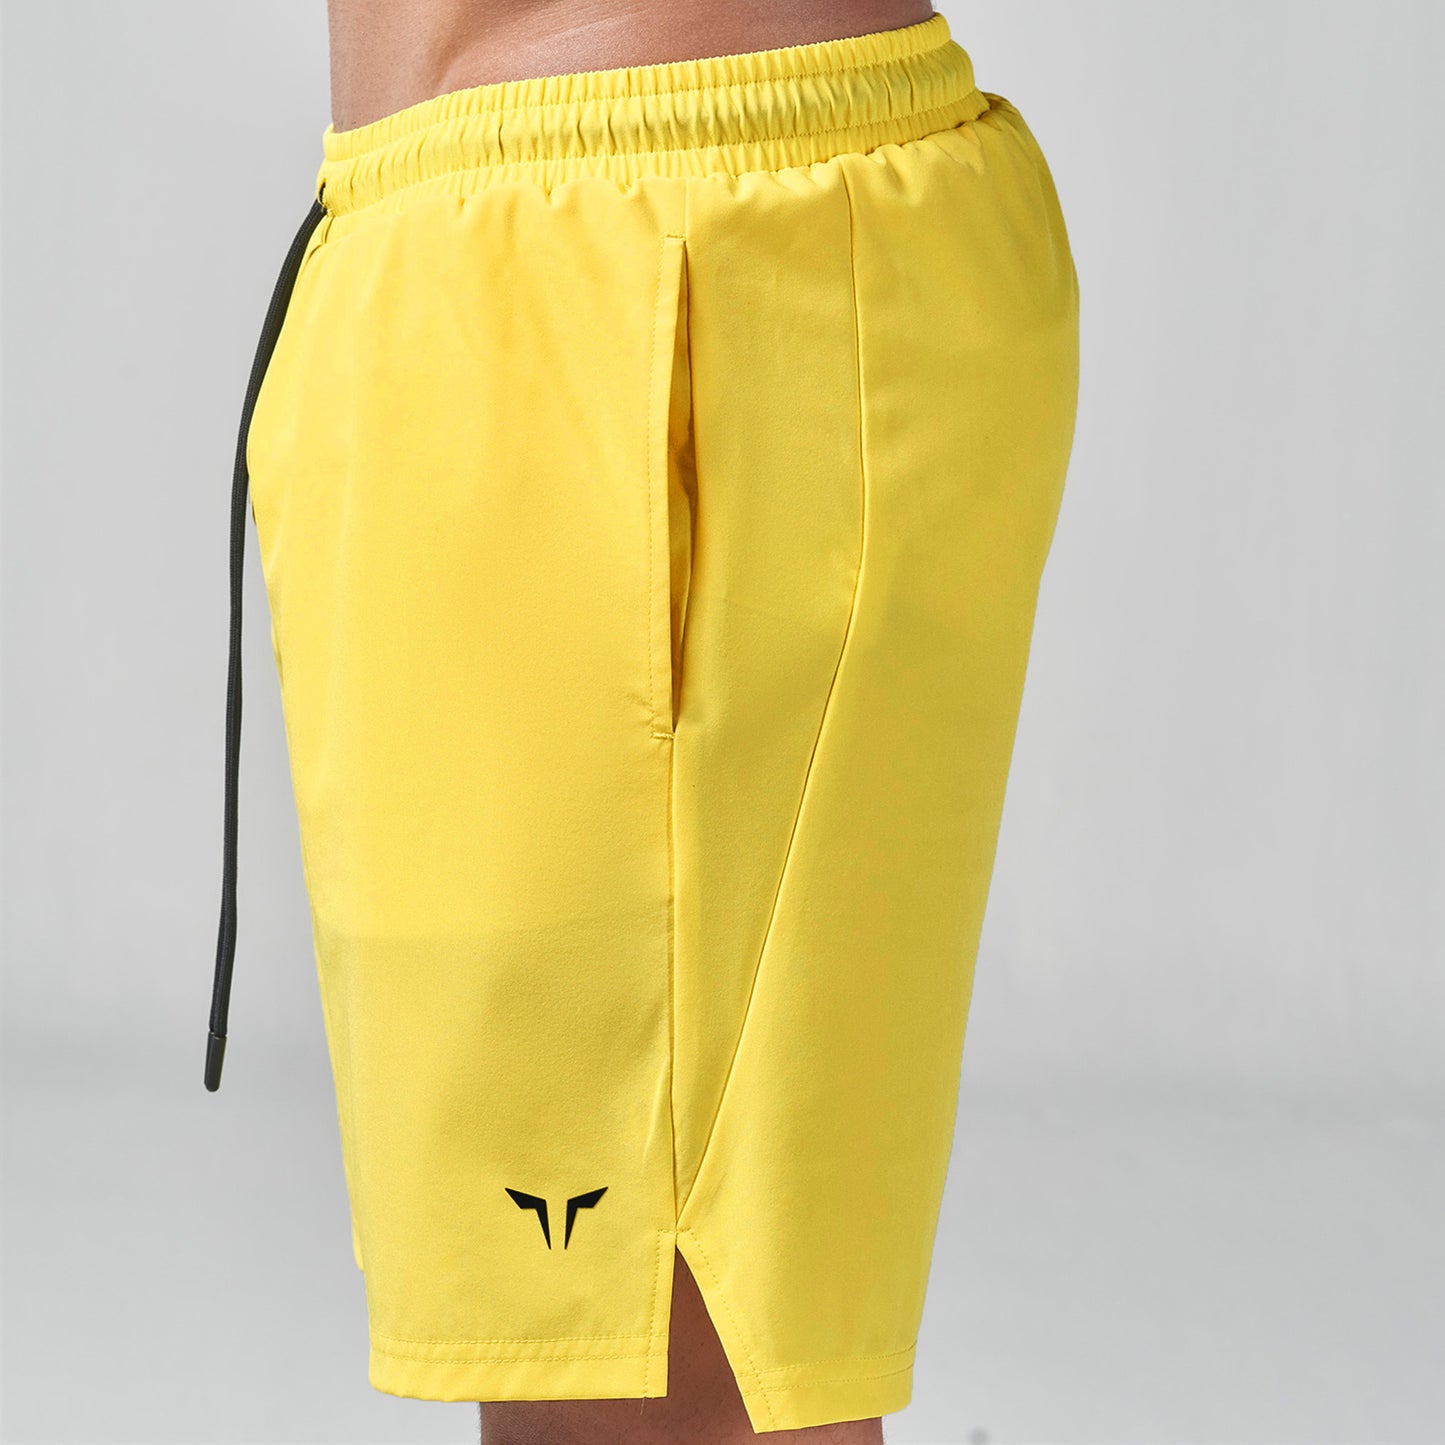 squatwolf-gym-wear-essential-7-inch-shorts-yellow-workout-short-for-men